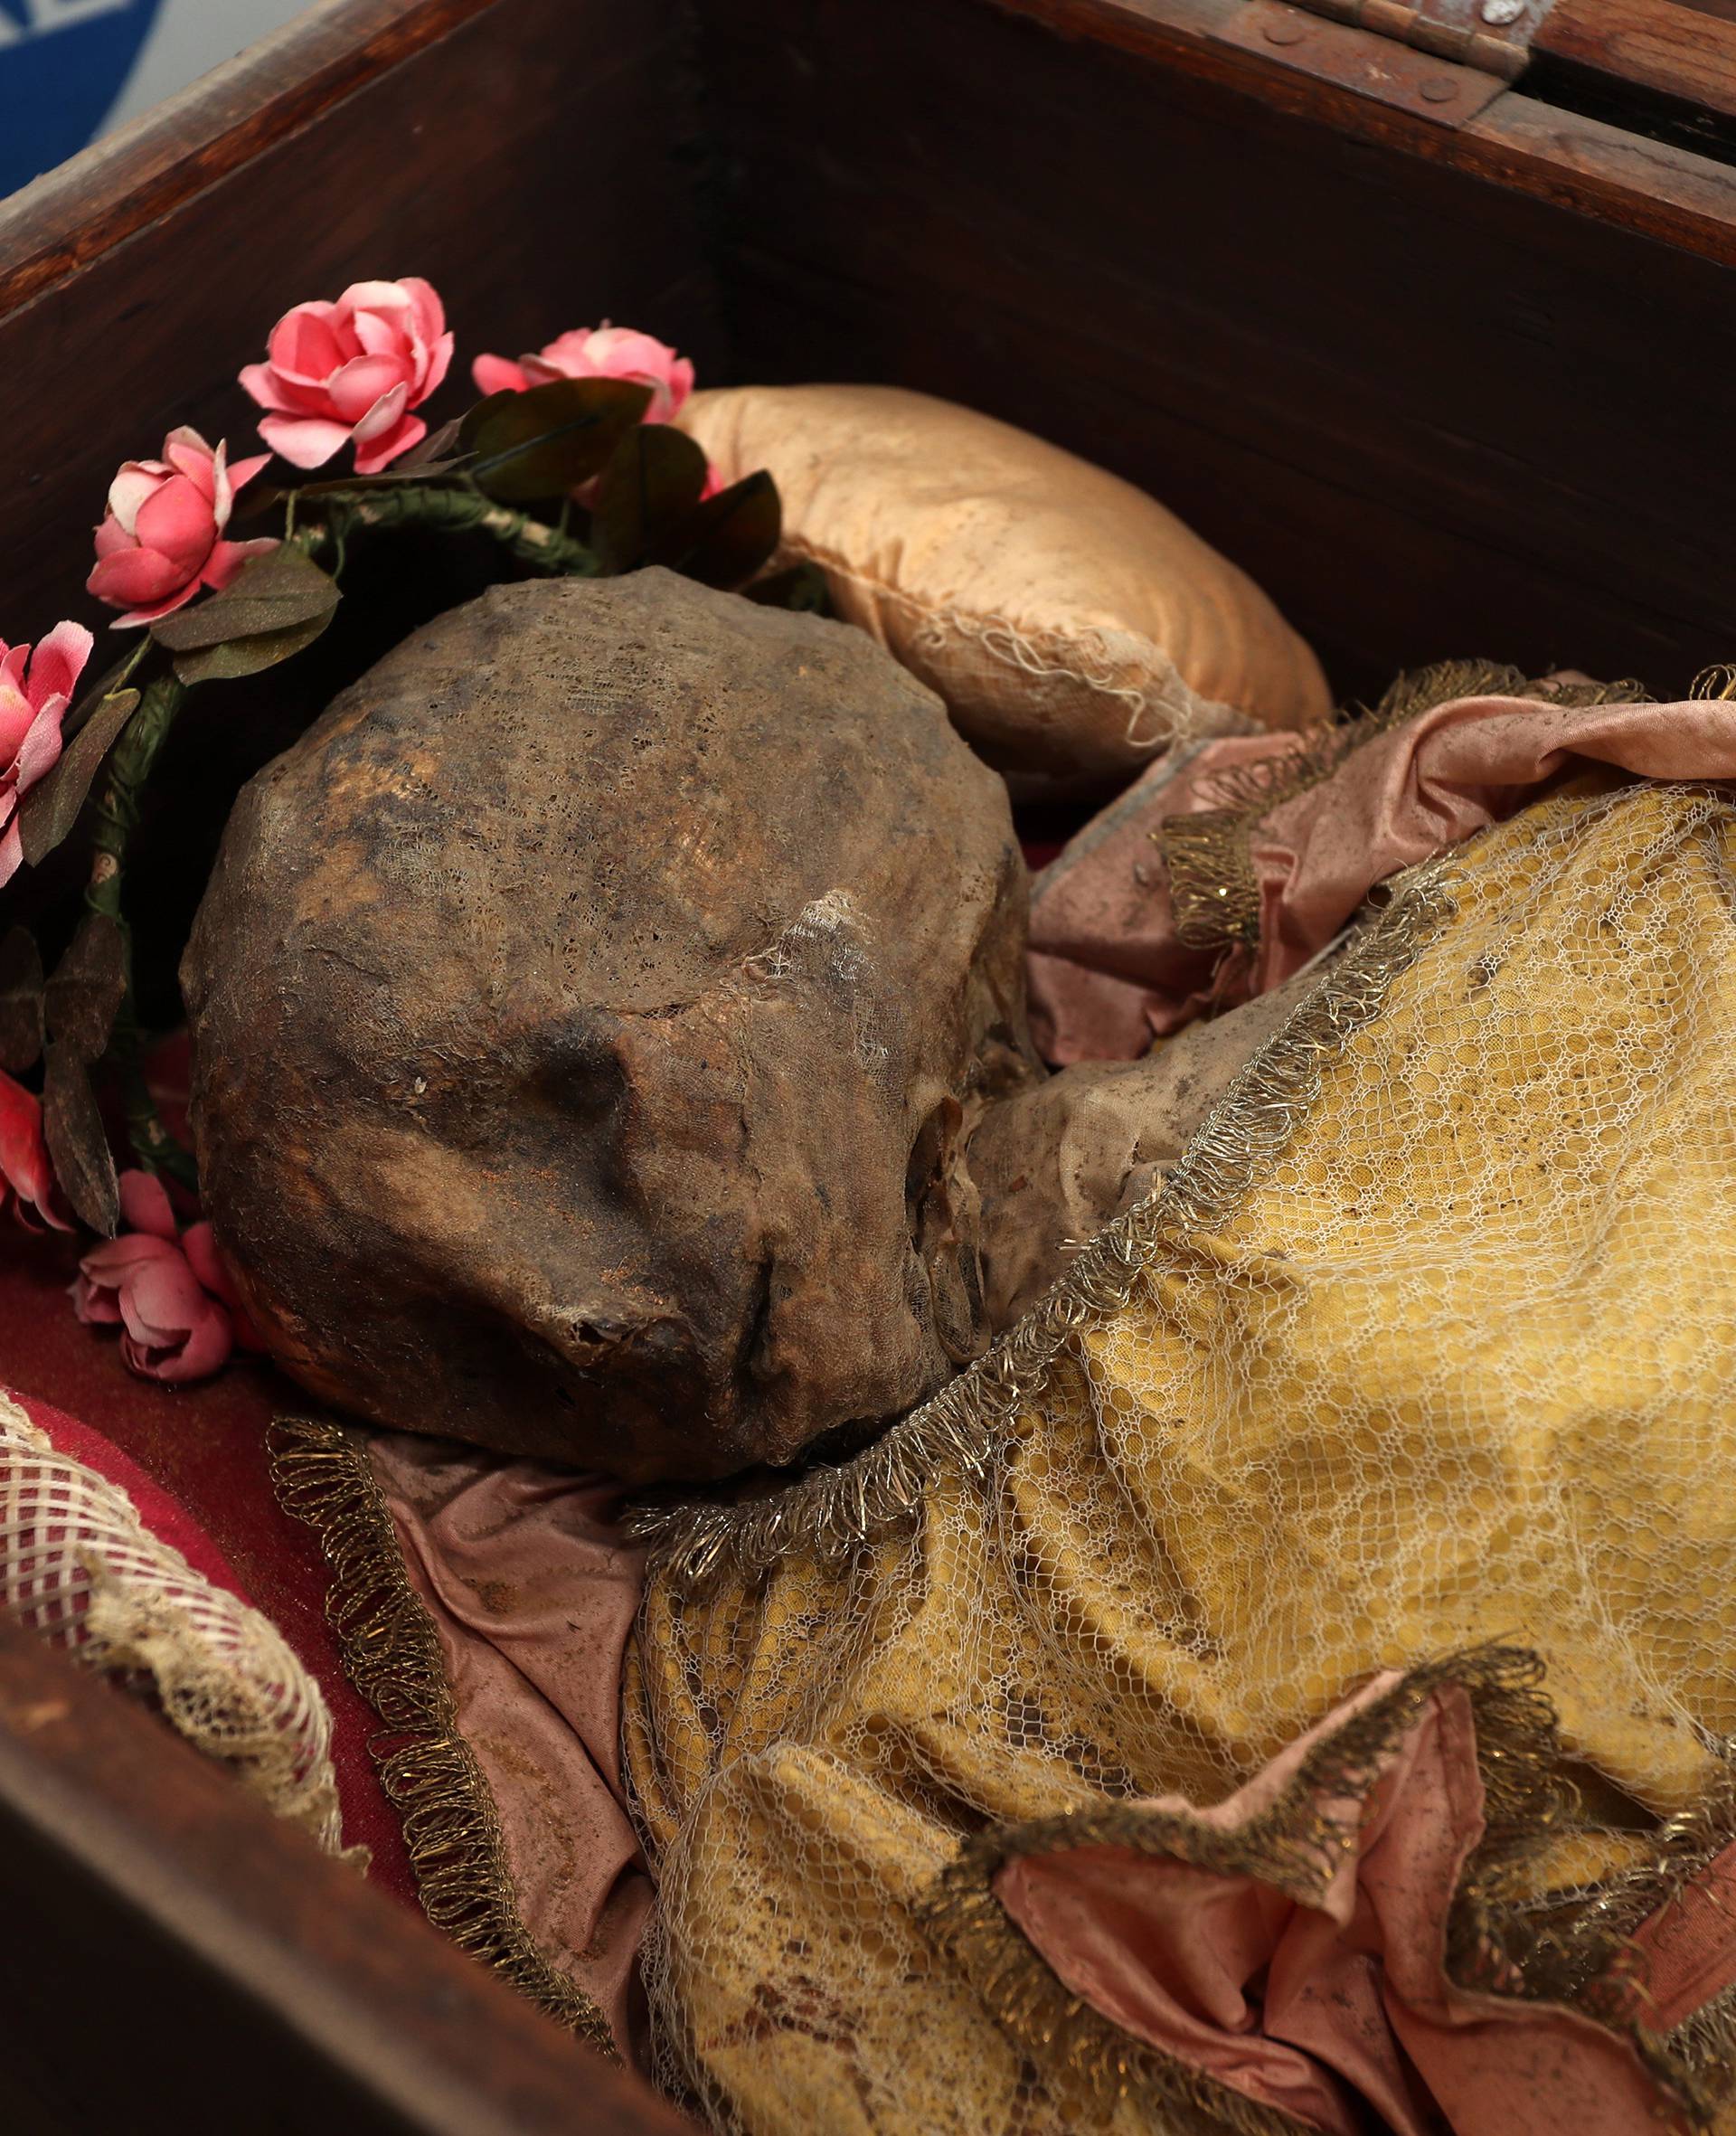 Palermo, a mummified child found in a trunk in the graveyard of the scrolls